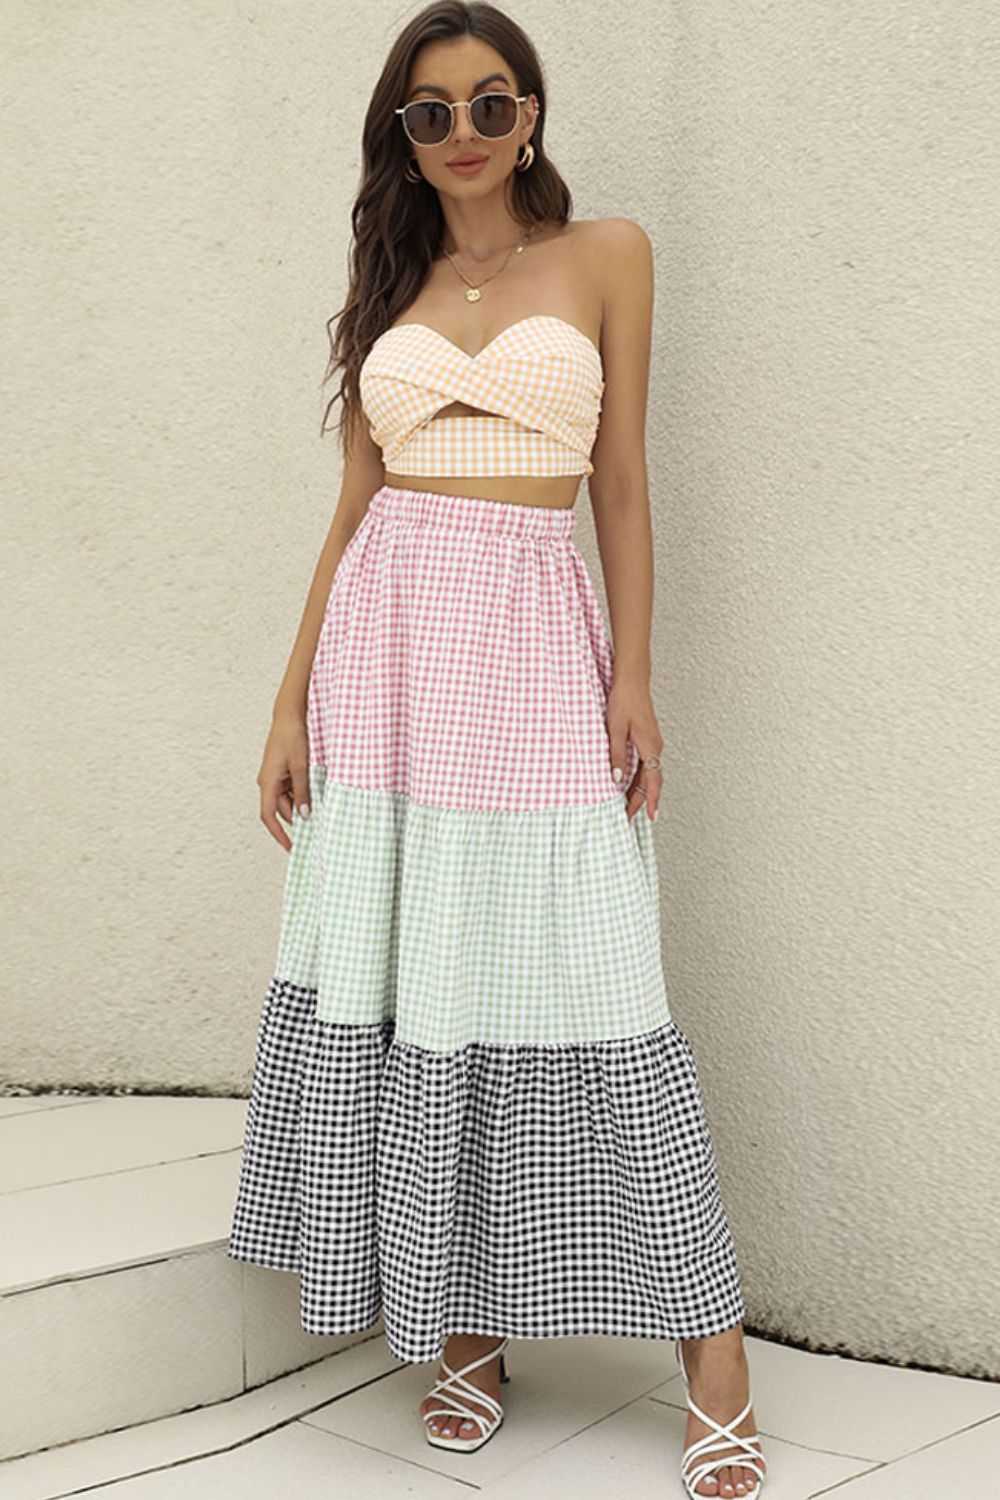 Women's Full Size Plaid Strapless Top and Tiered Skirt Set